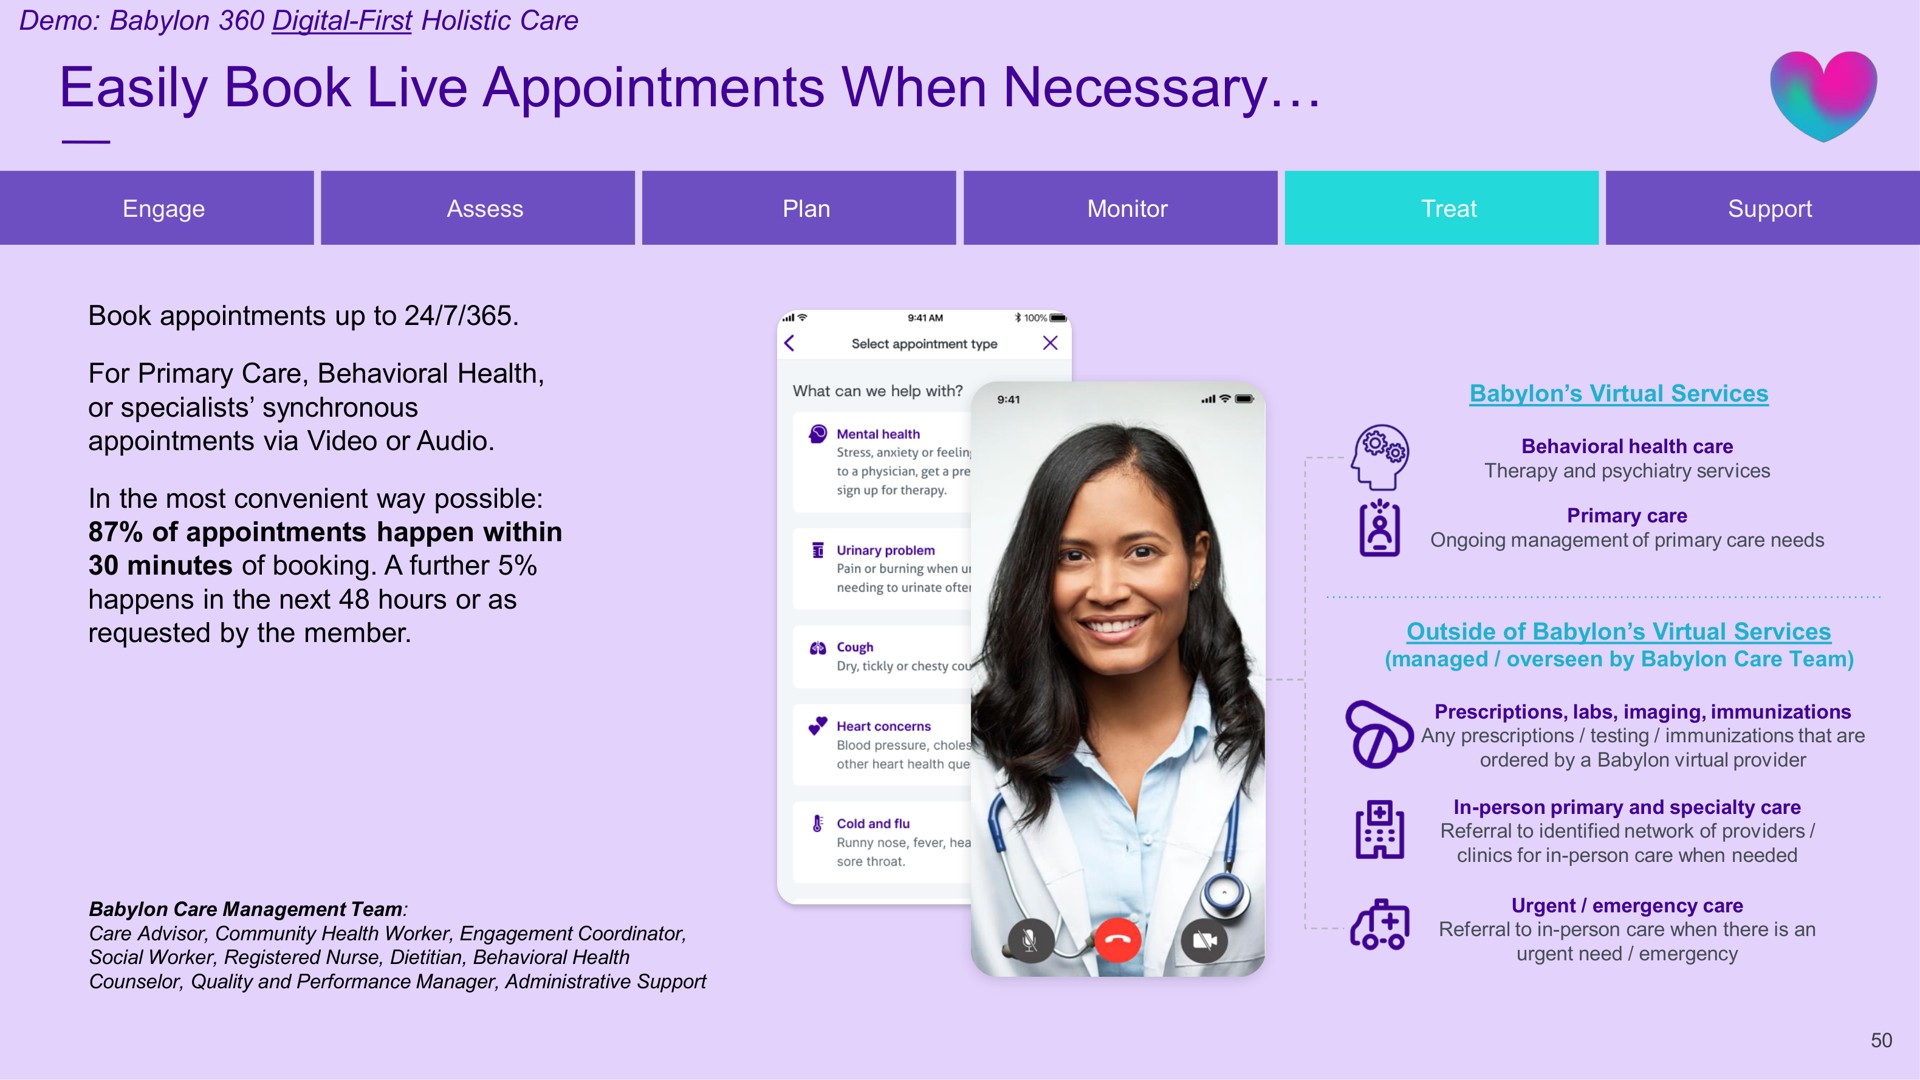 easily book live appointments when necessary | Babylon